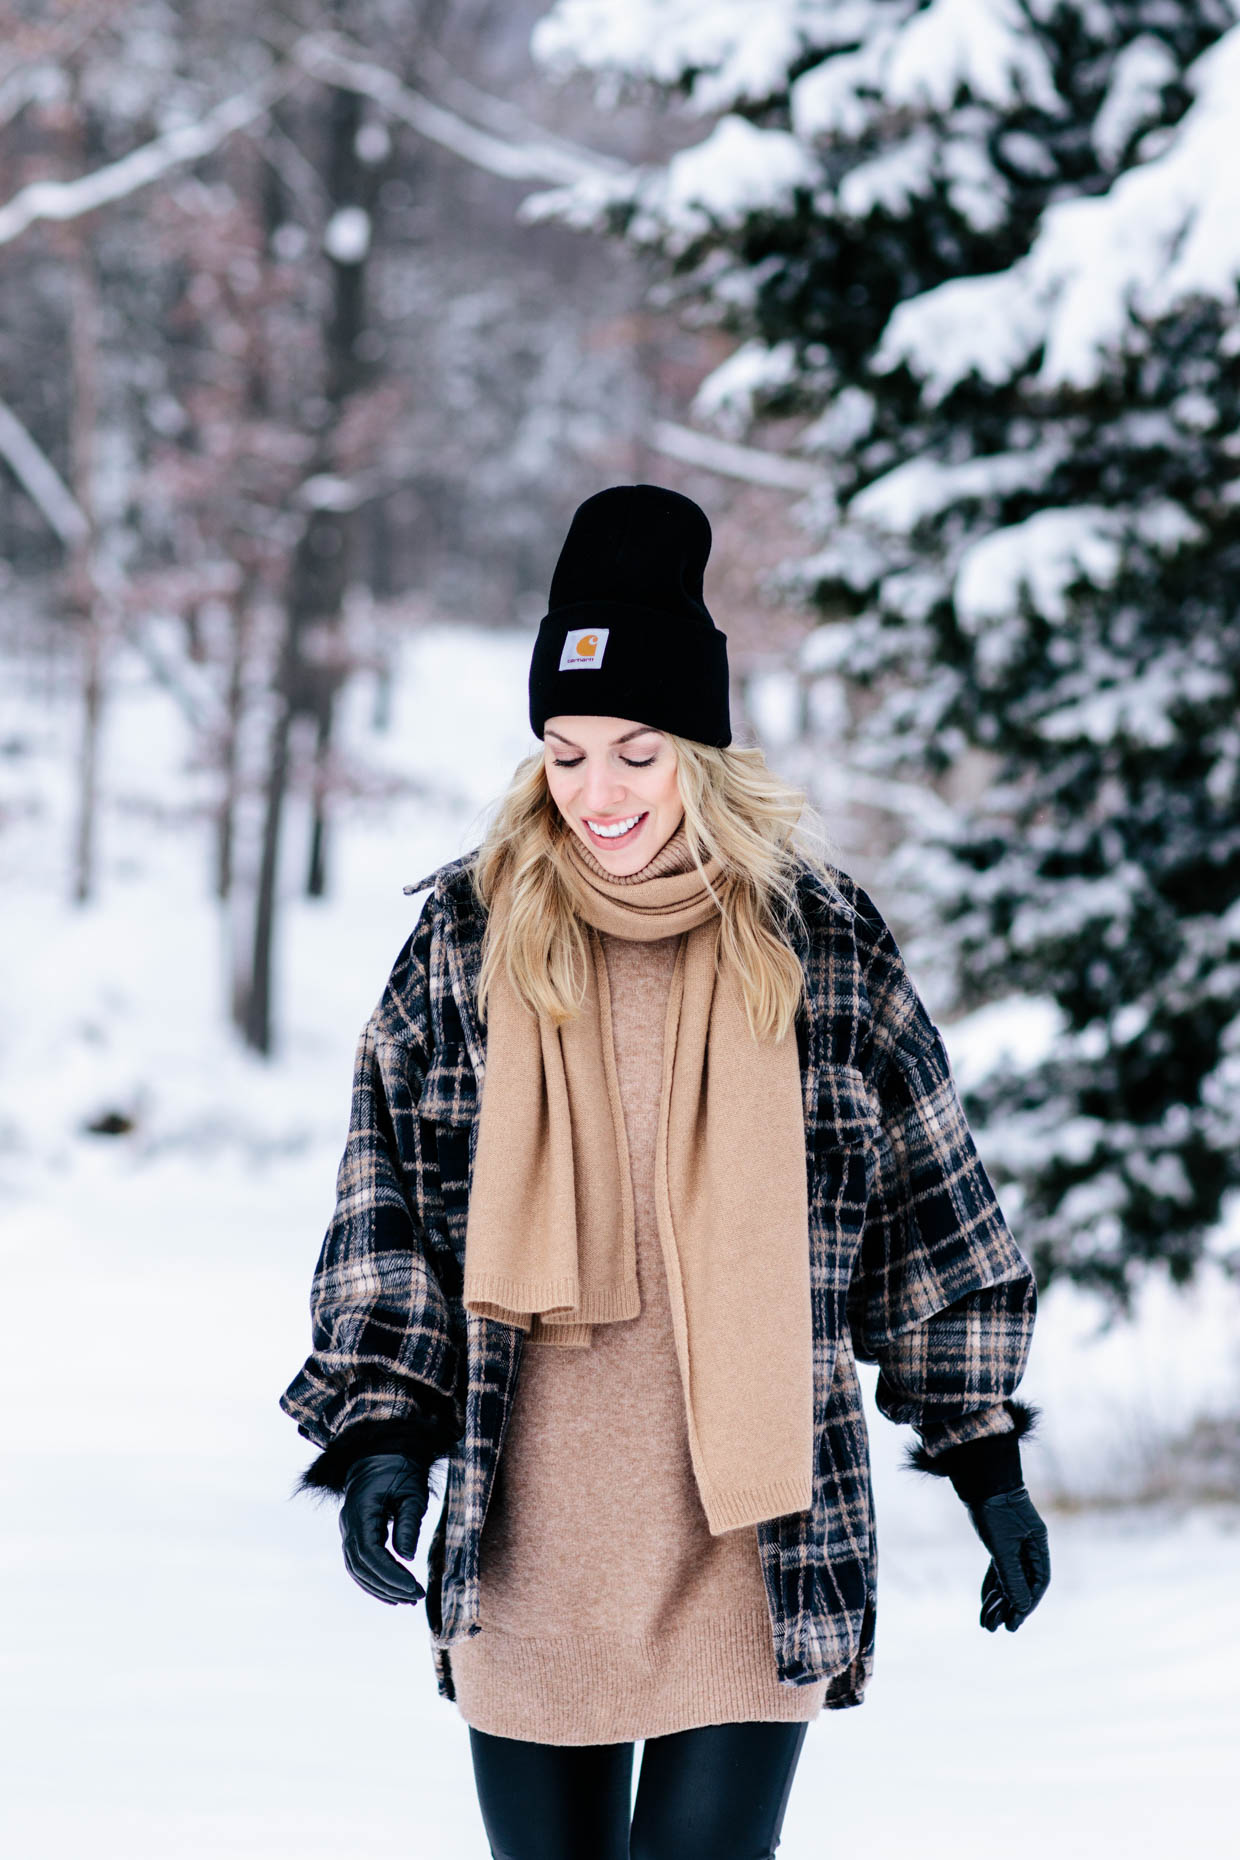 snow outfit Archives - Meagan's Moda